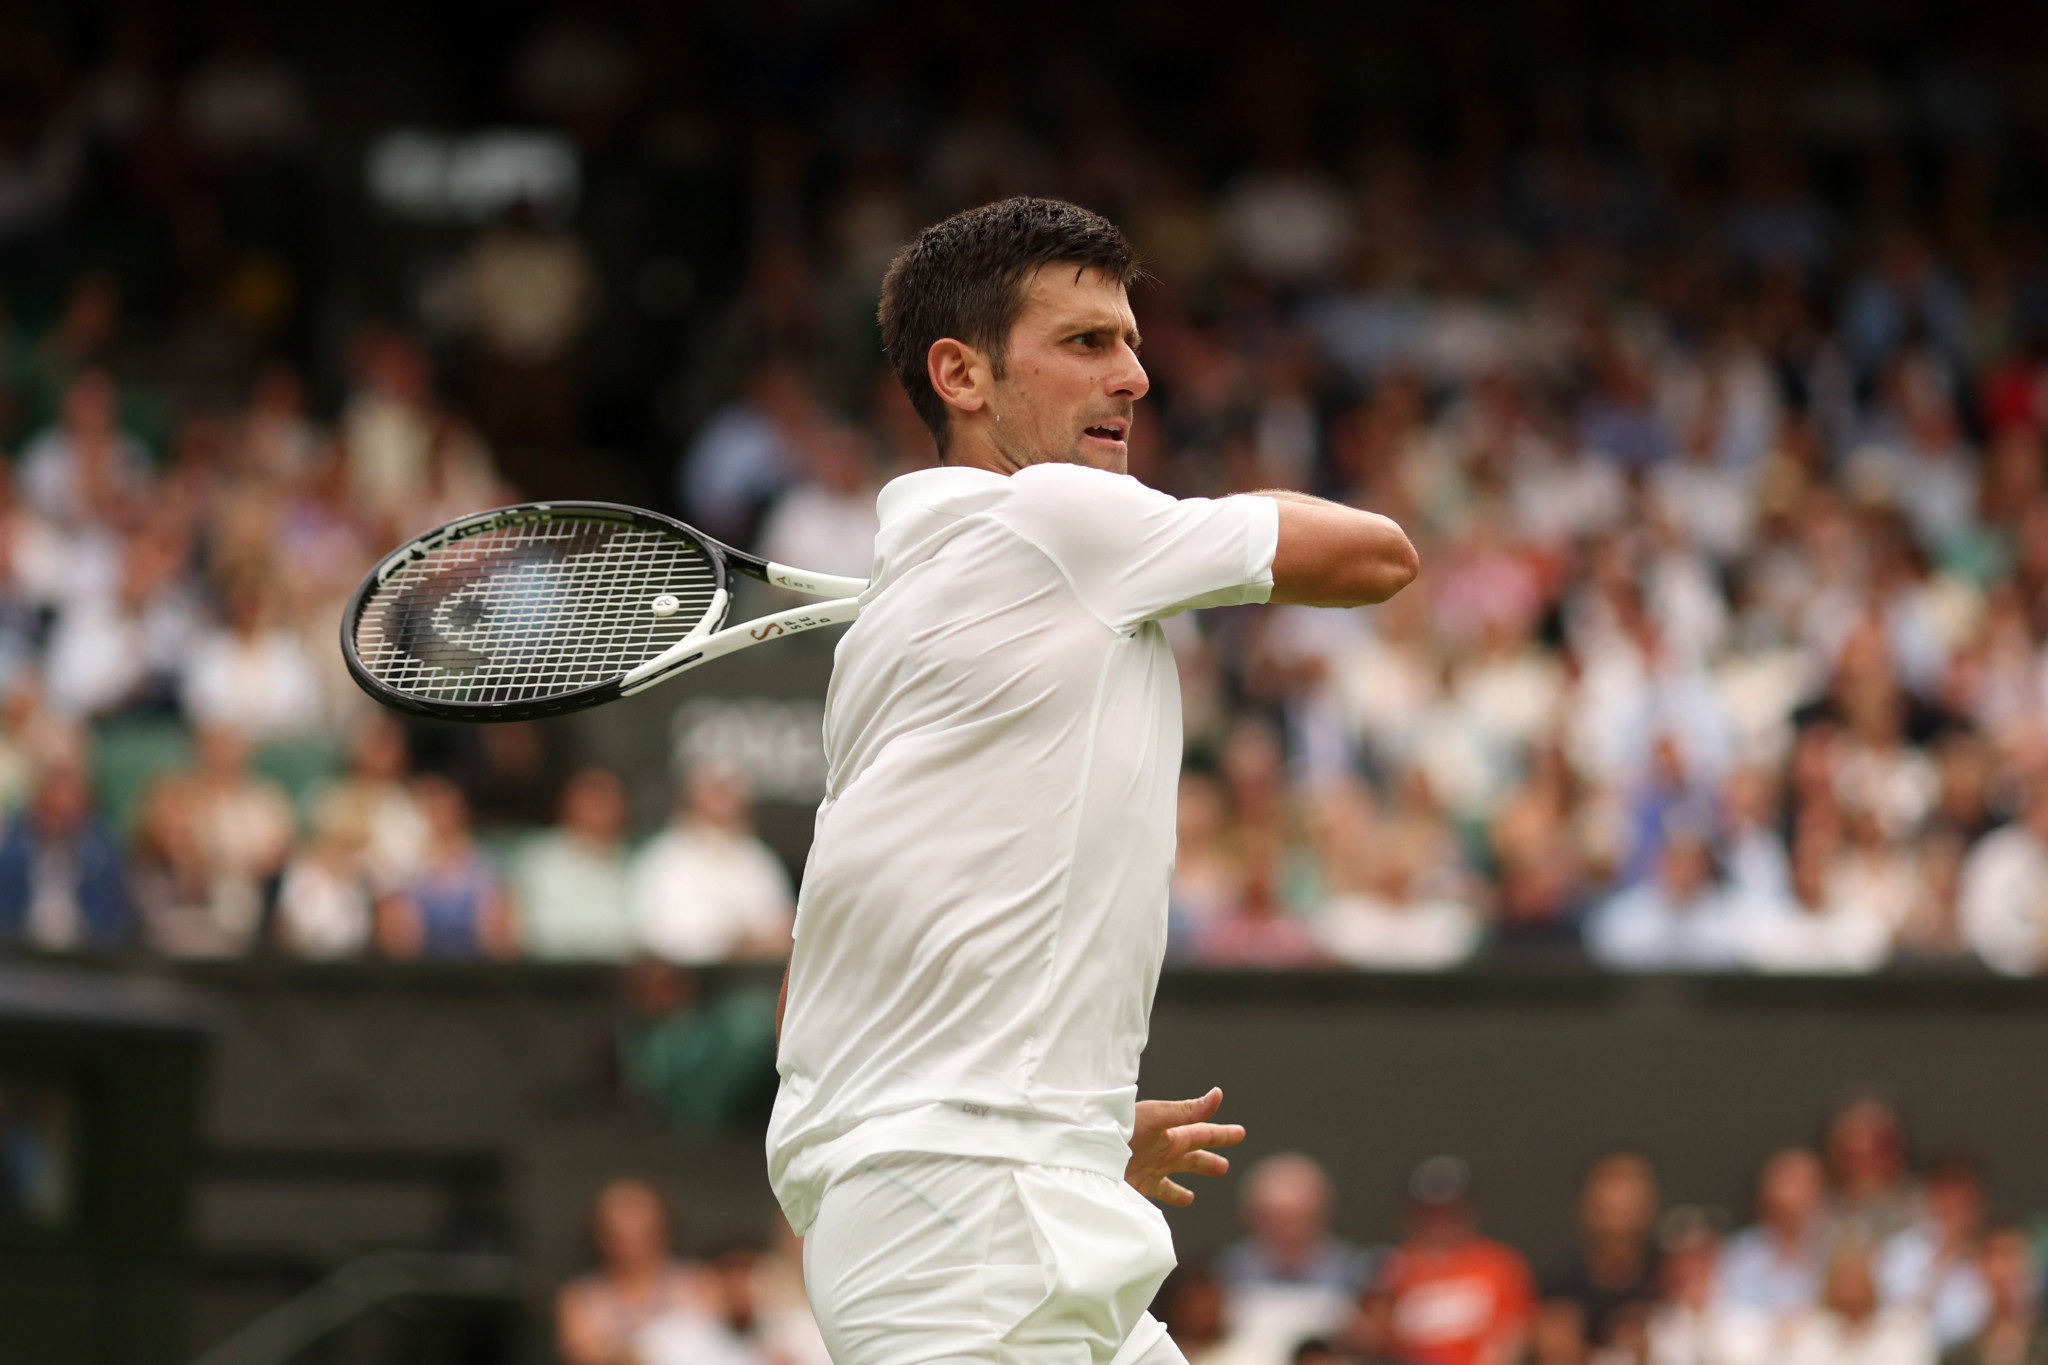 Defending champion Novak Djokovic made a winning start at Wimbledon - likely the Serbian's last Grand Slam for 11 months ©Getty Images